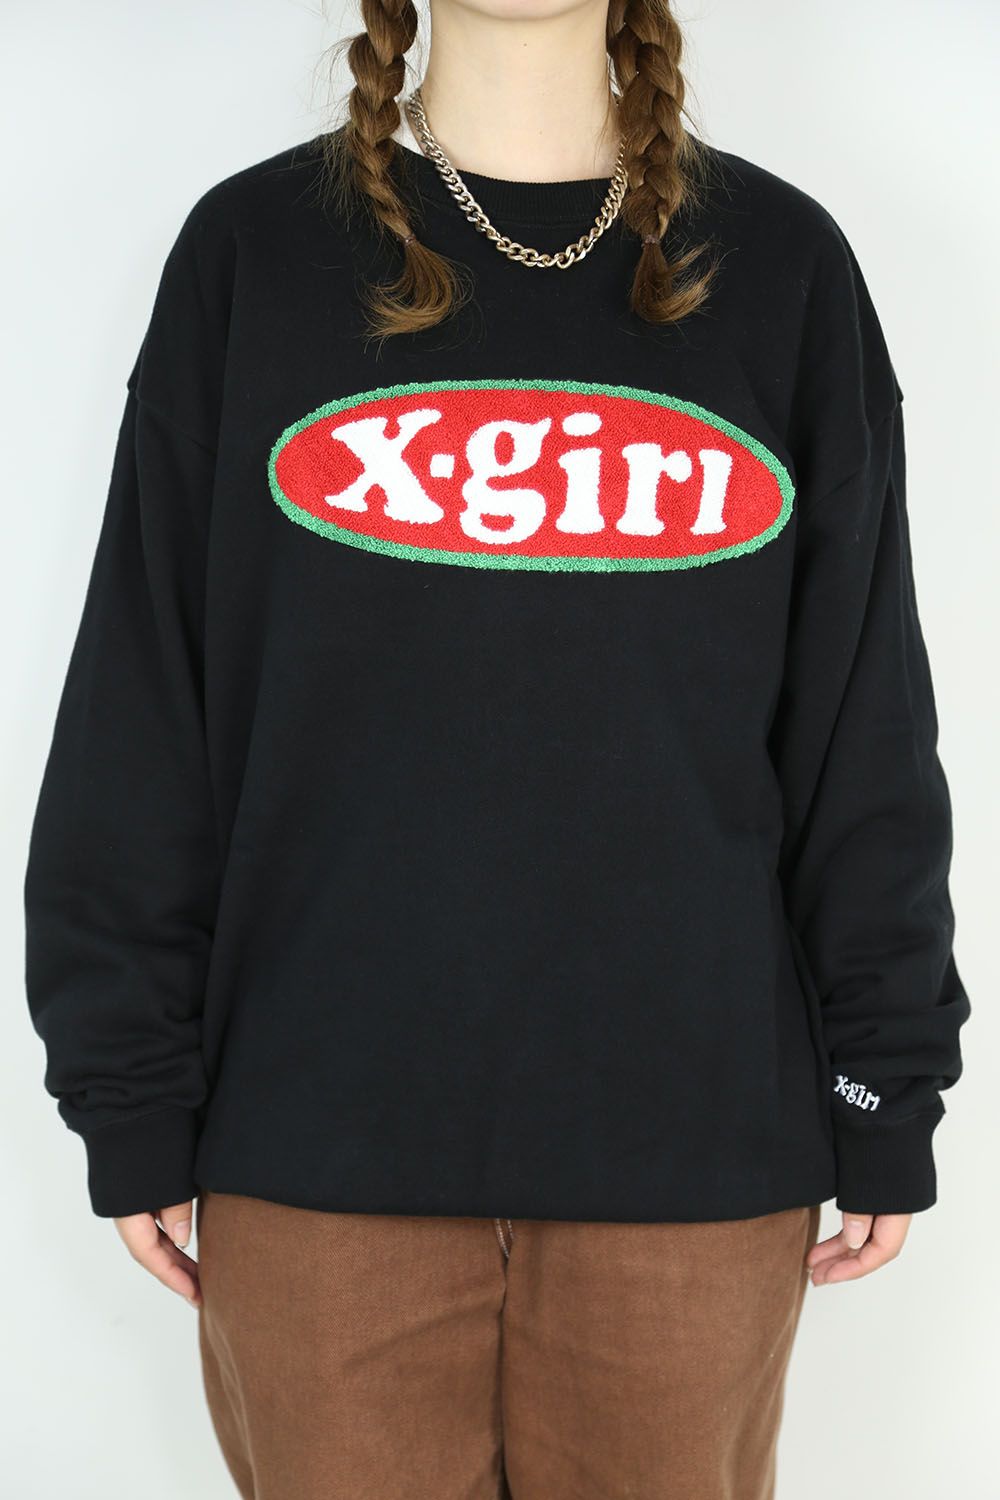 X-girl - CHENILLE EMBROIDERY OVAL LOGO CREW SWEAT TOP / ブラック ...